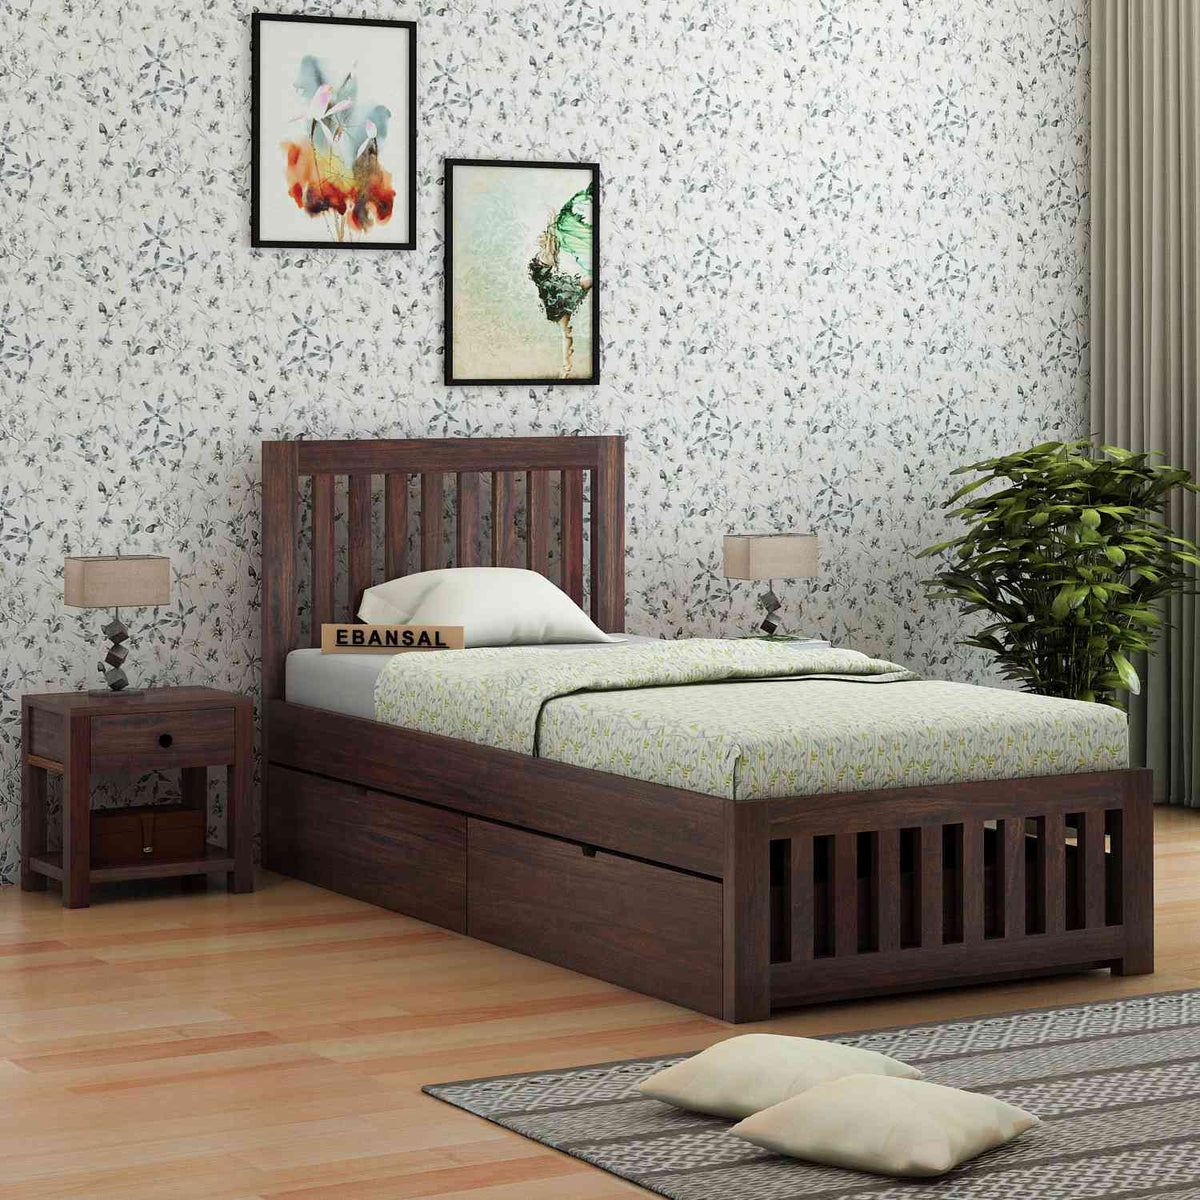 Fusta Solid Sheesham Wood Single Bed With Two Drawers (Walnut Finish)